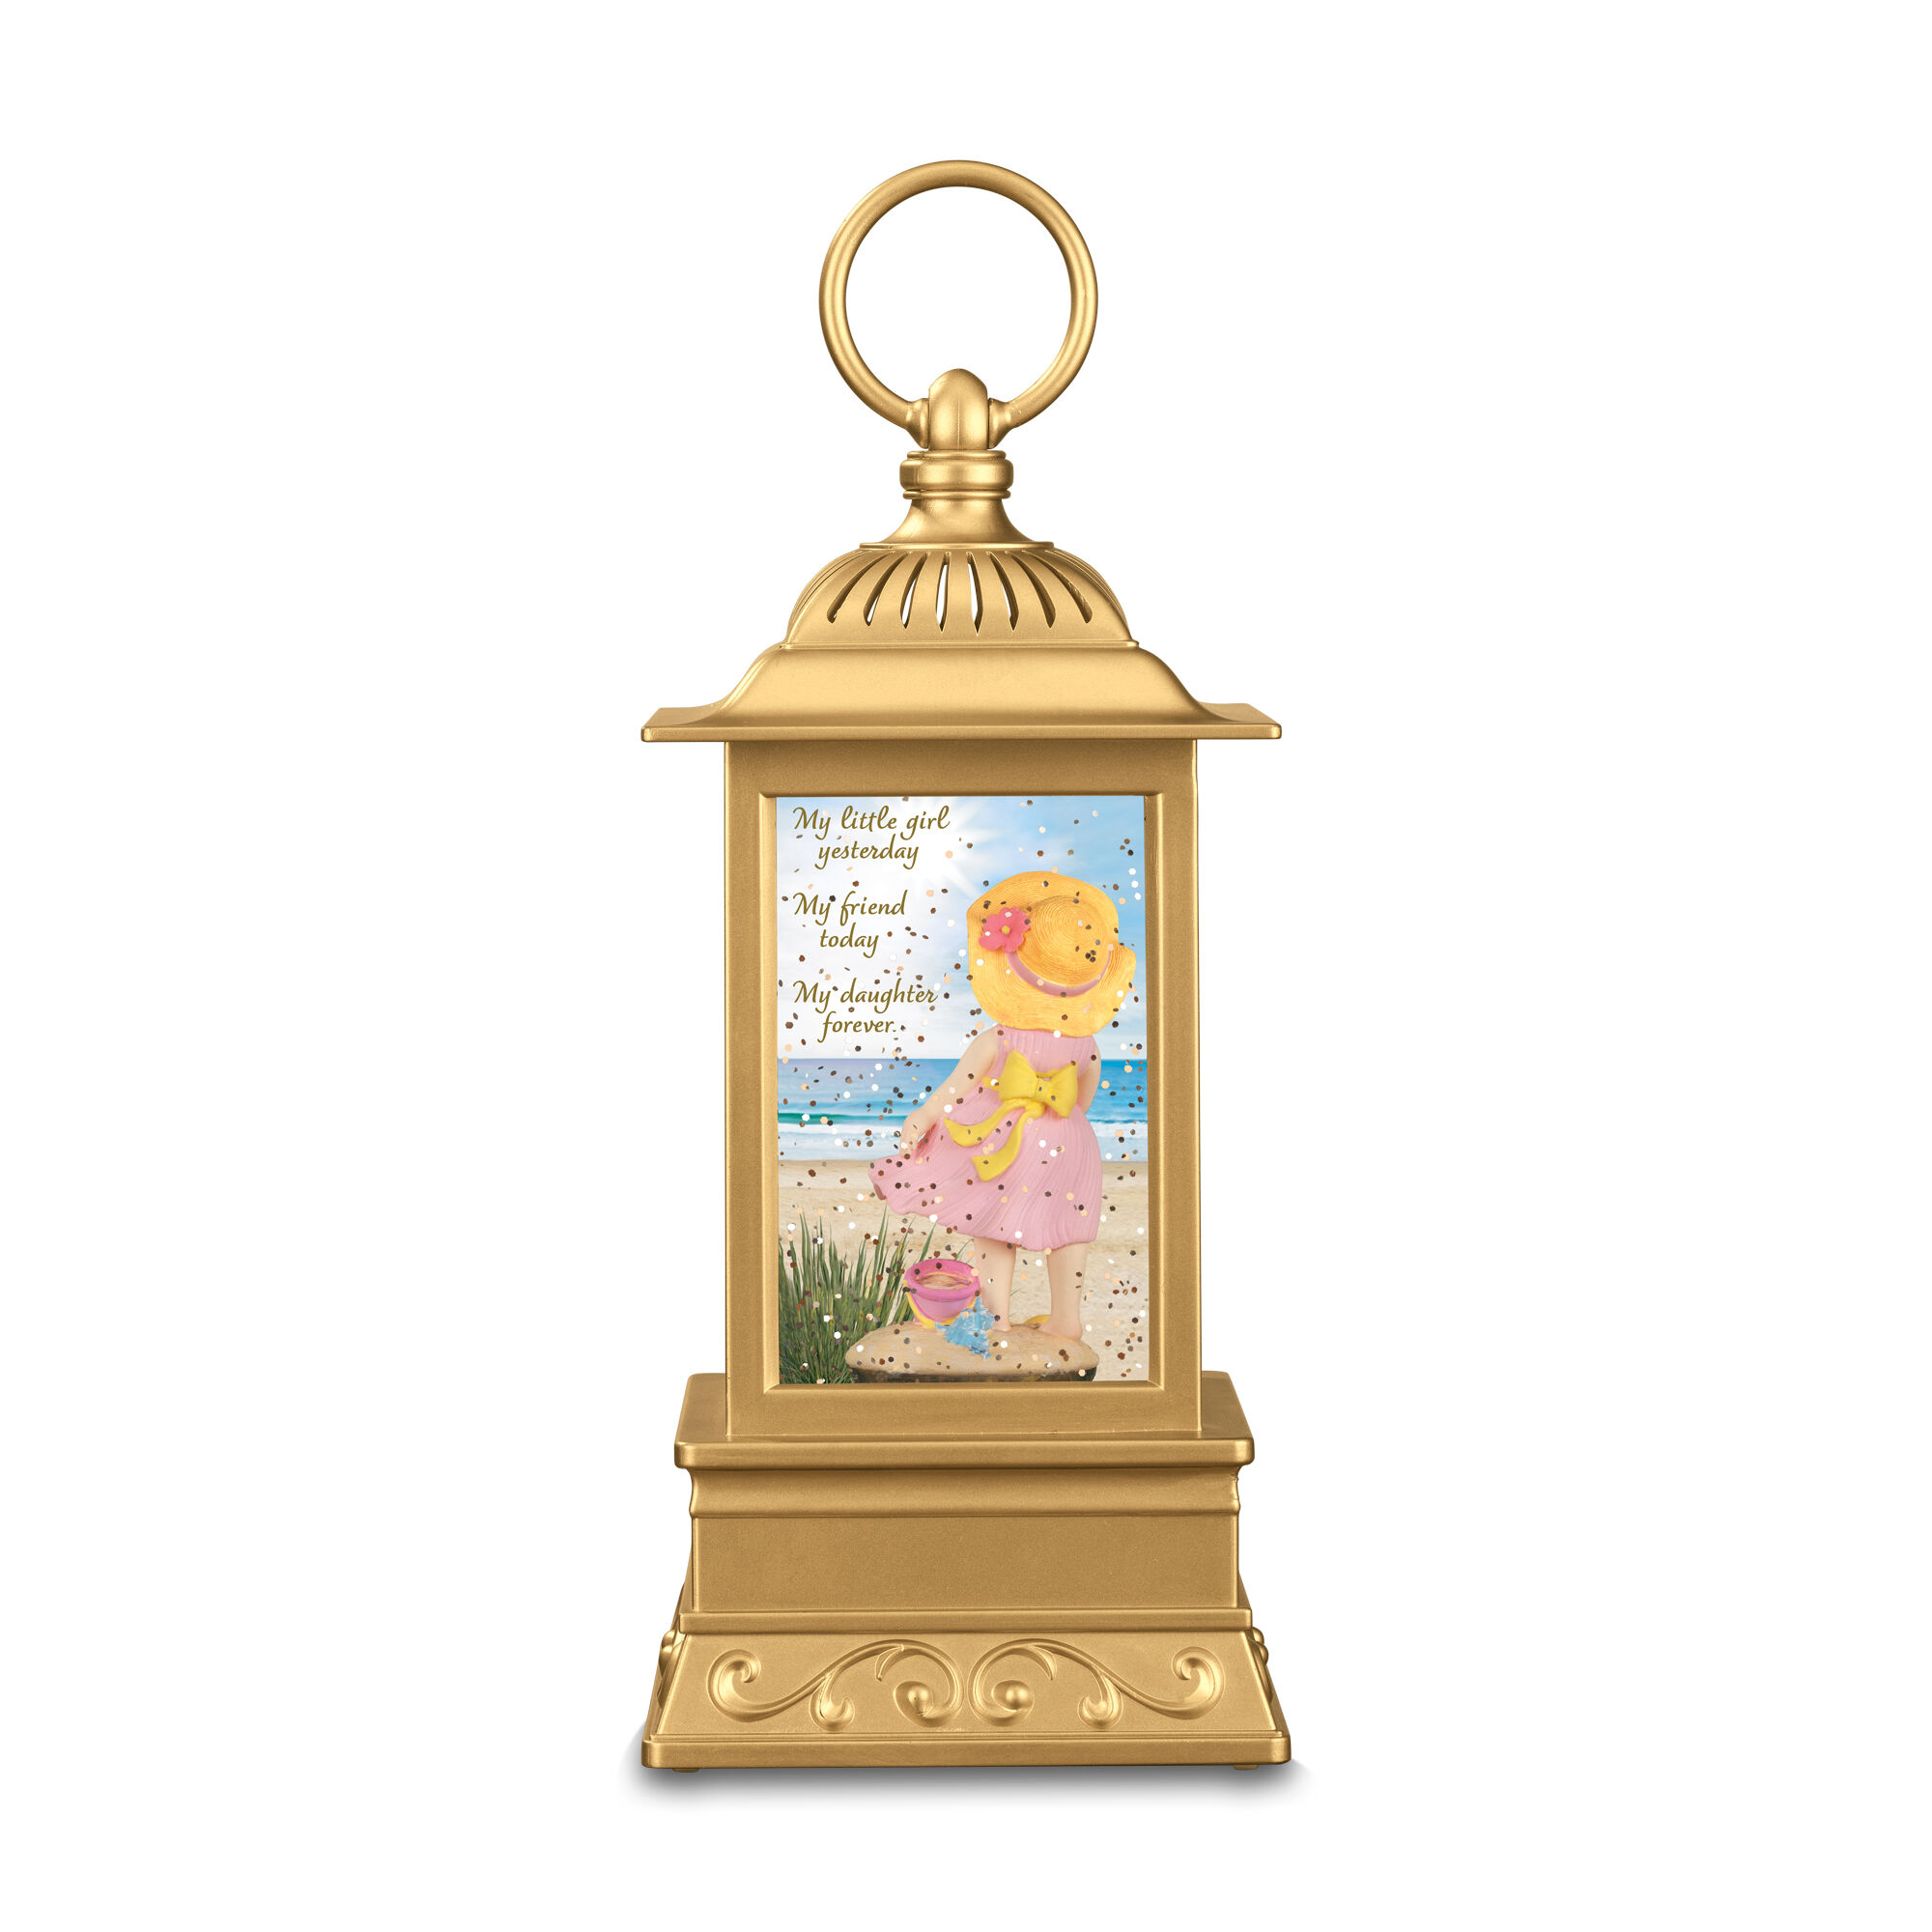 My Daughter Forever Lighted Water Lantern 11189 0018 a main